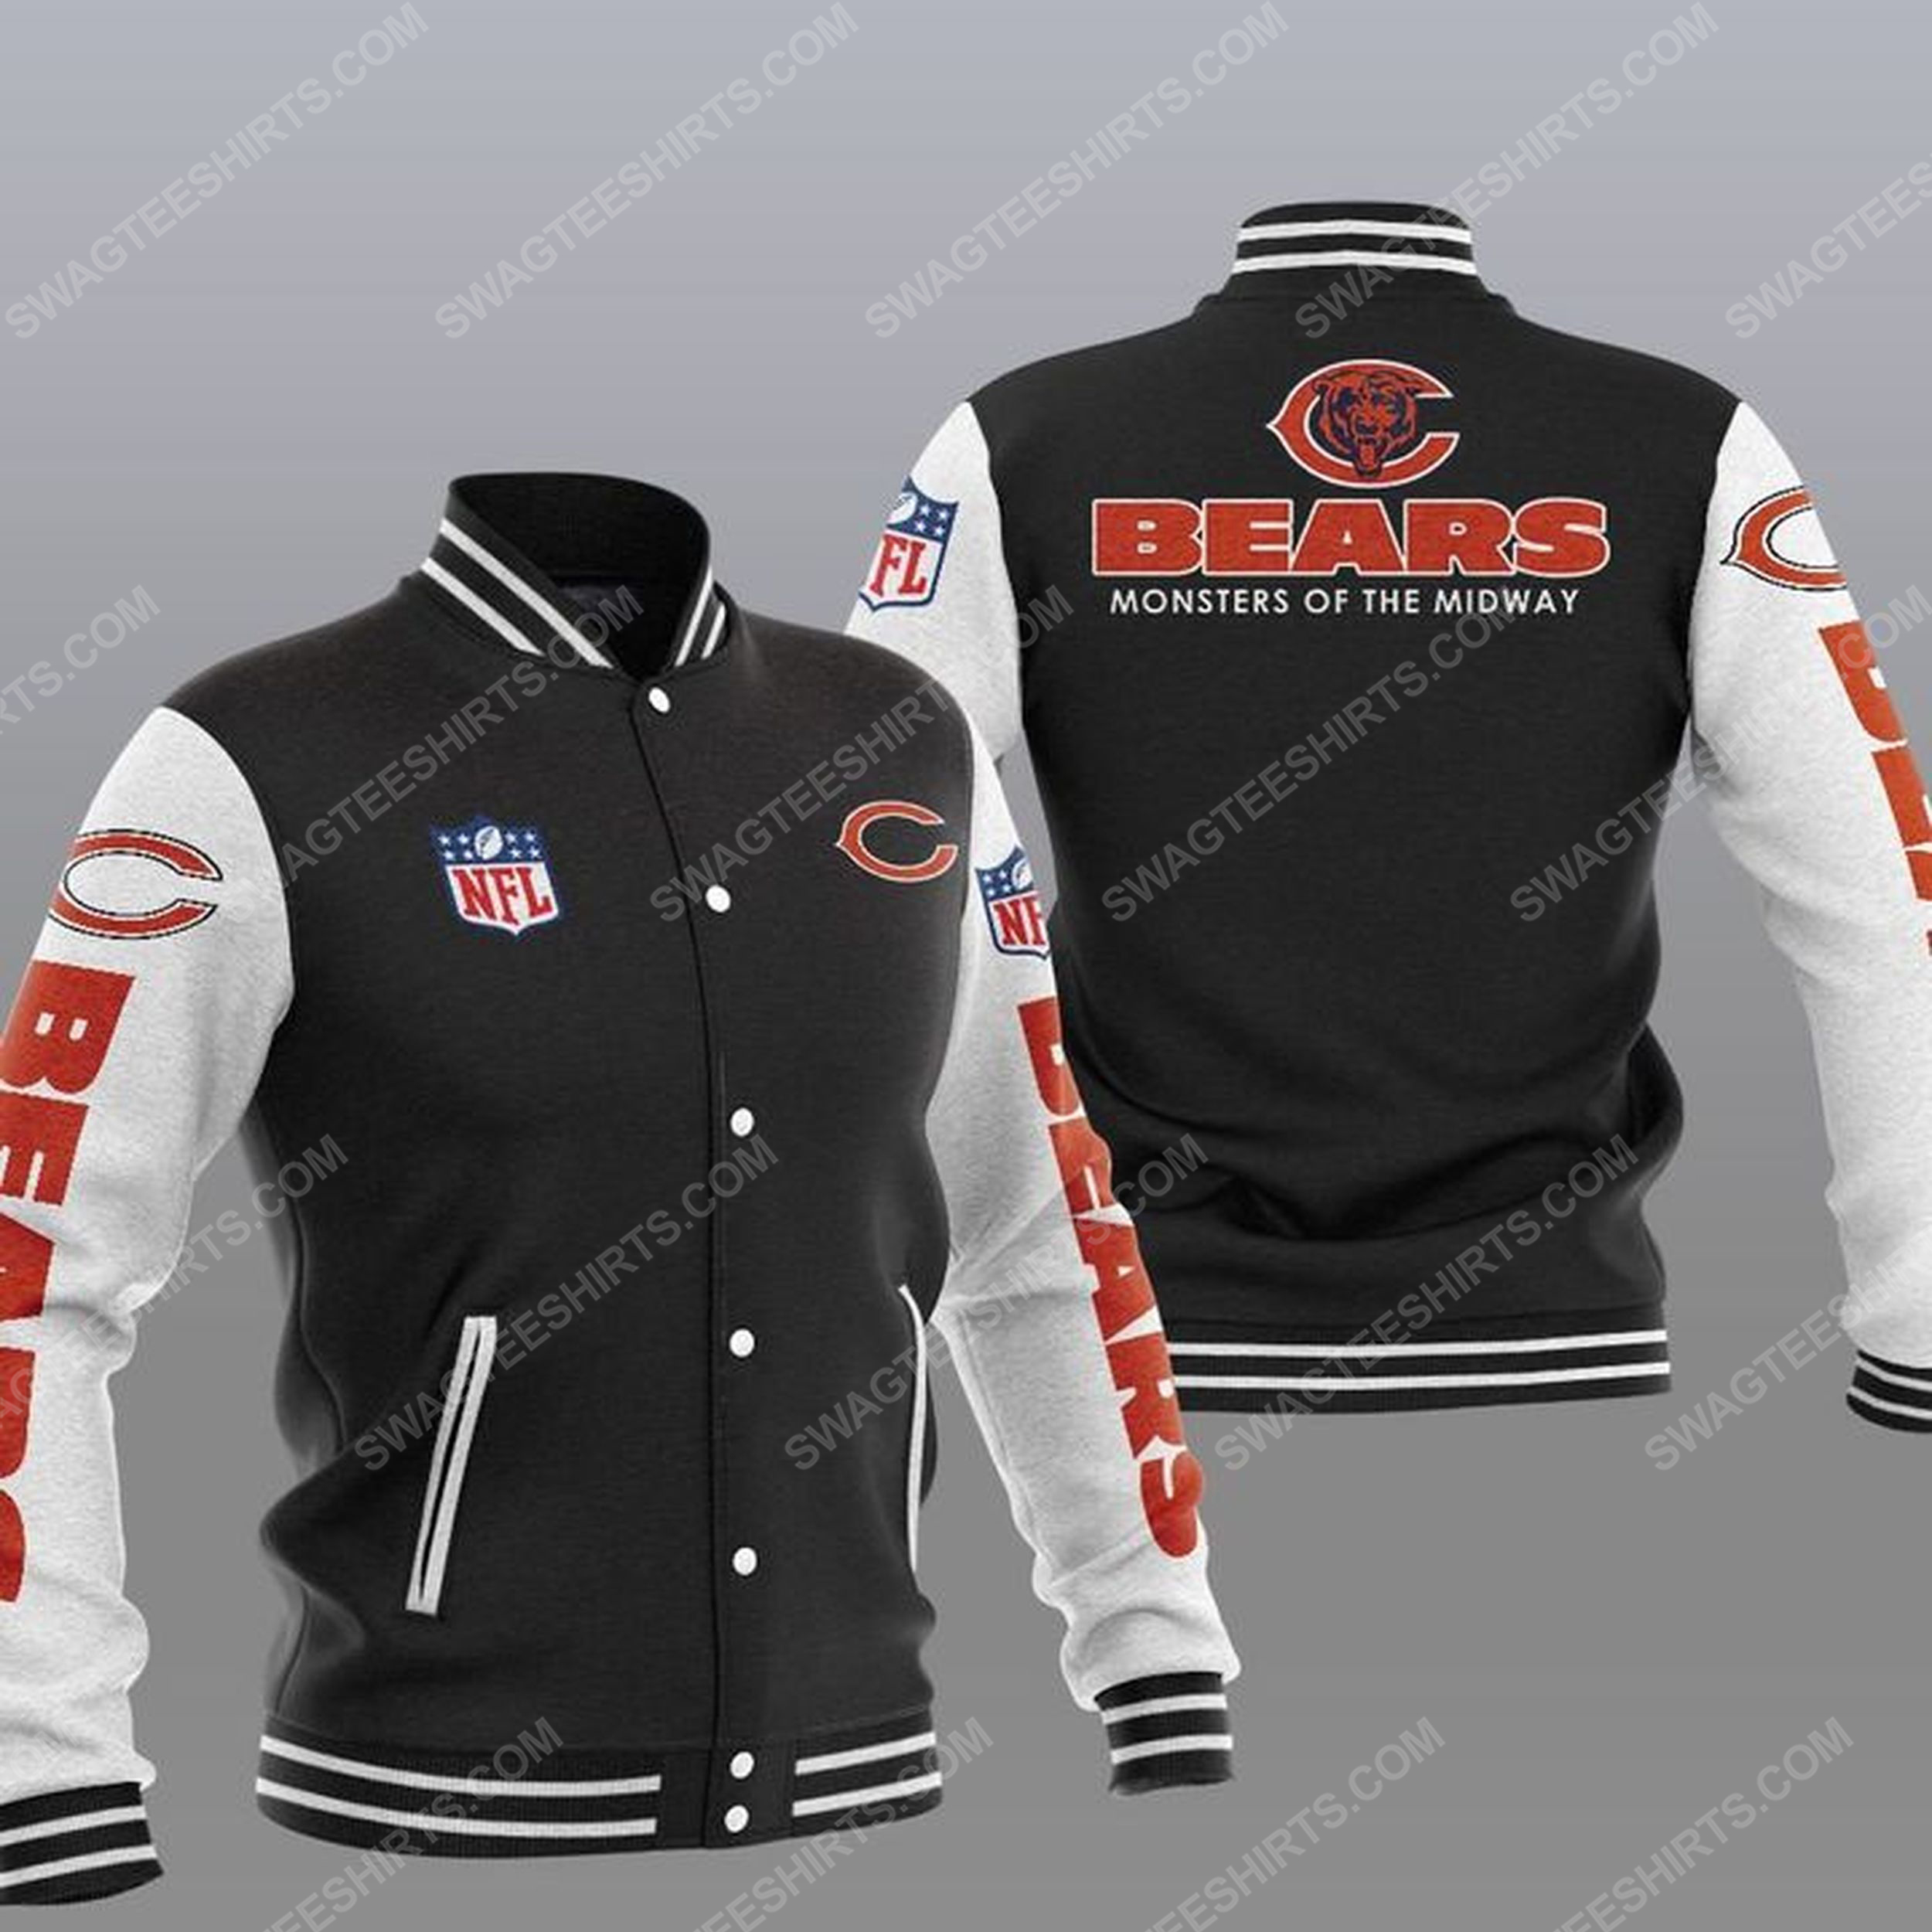 Chicago bears monsters of the midway all over print baseball jacket - black 1